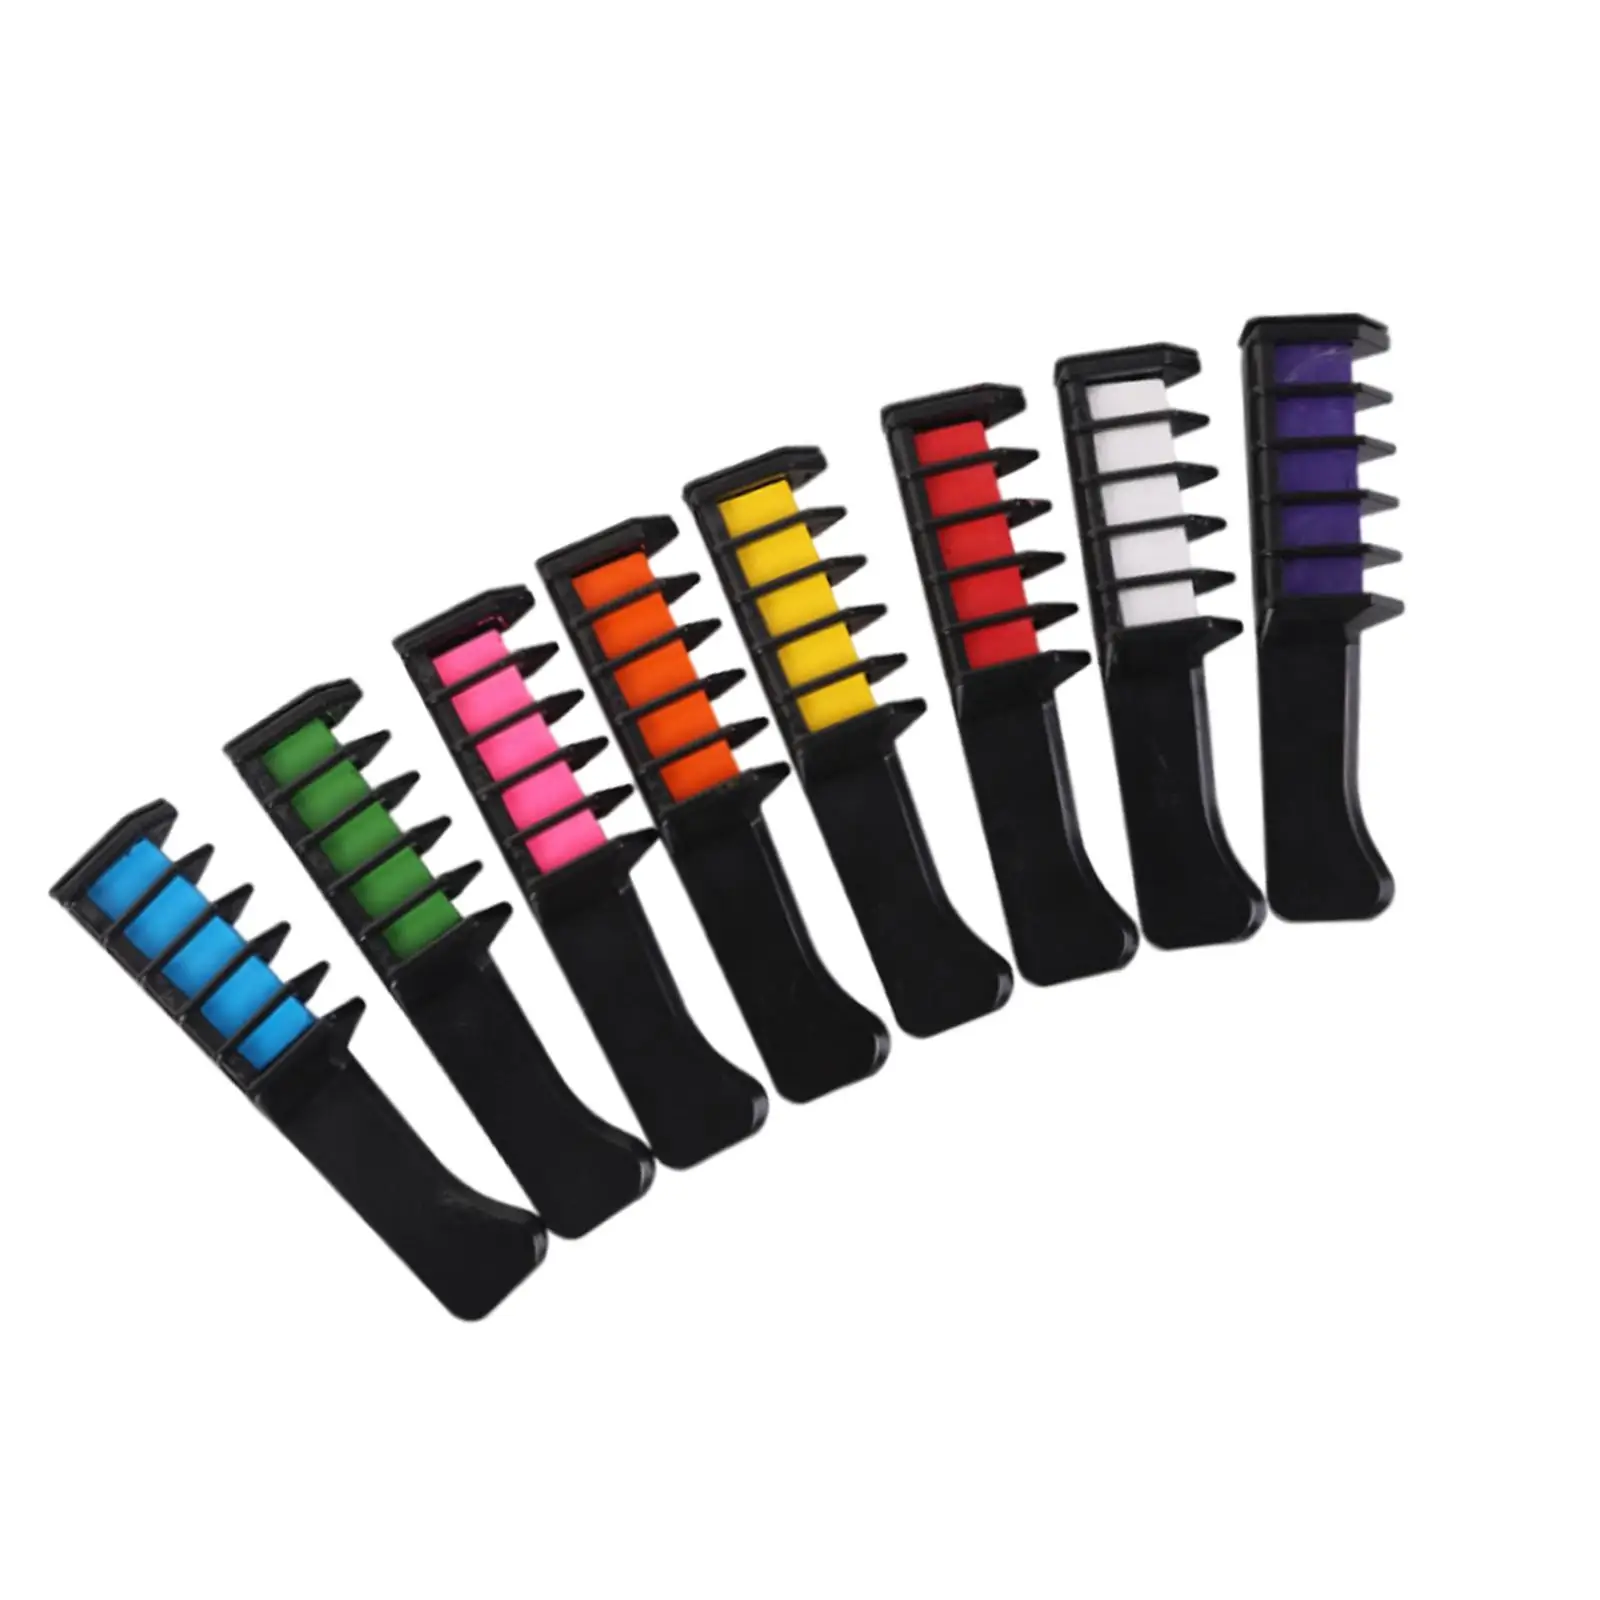 12 Pieces Disposable Hair Dyeing Combs Styling Accessory 12 Colors Temporary Hair Color Chalk Comb Hair Highlights for Cosplay